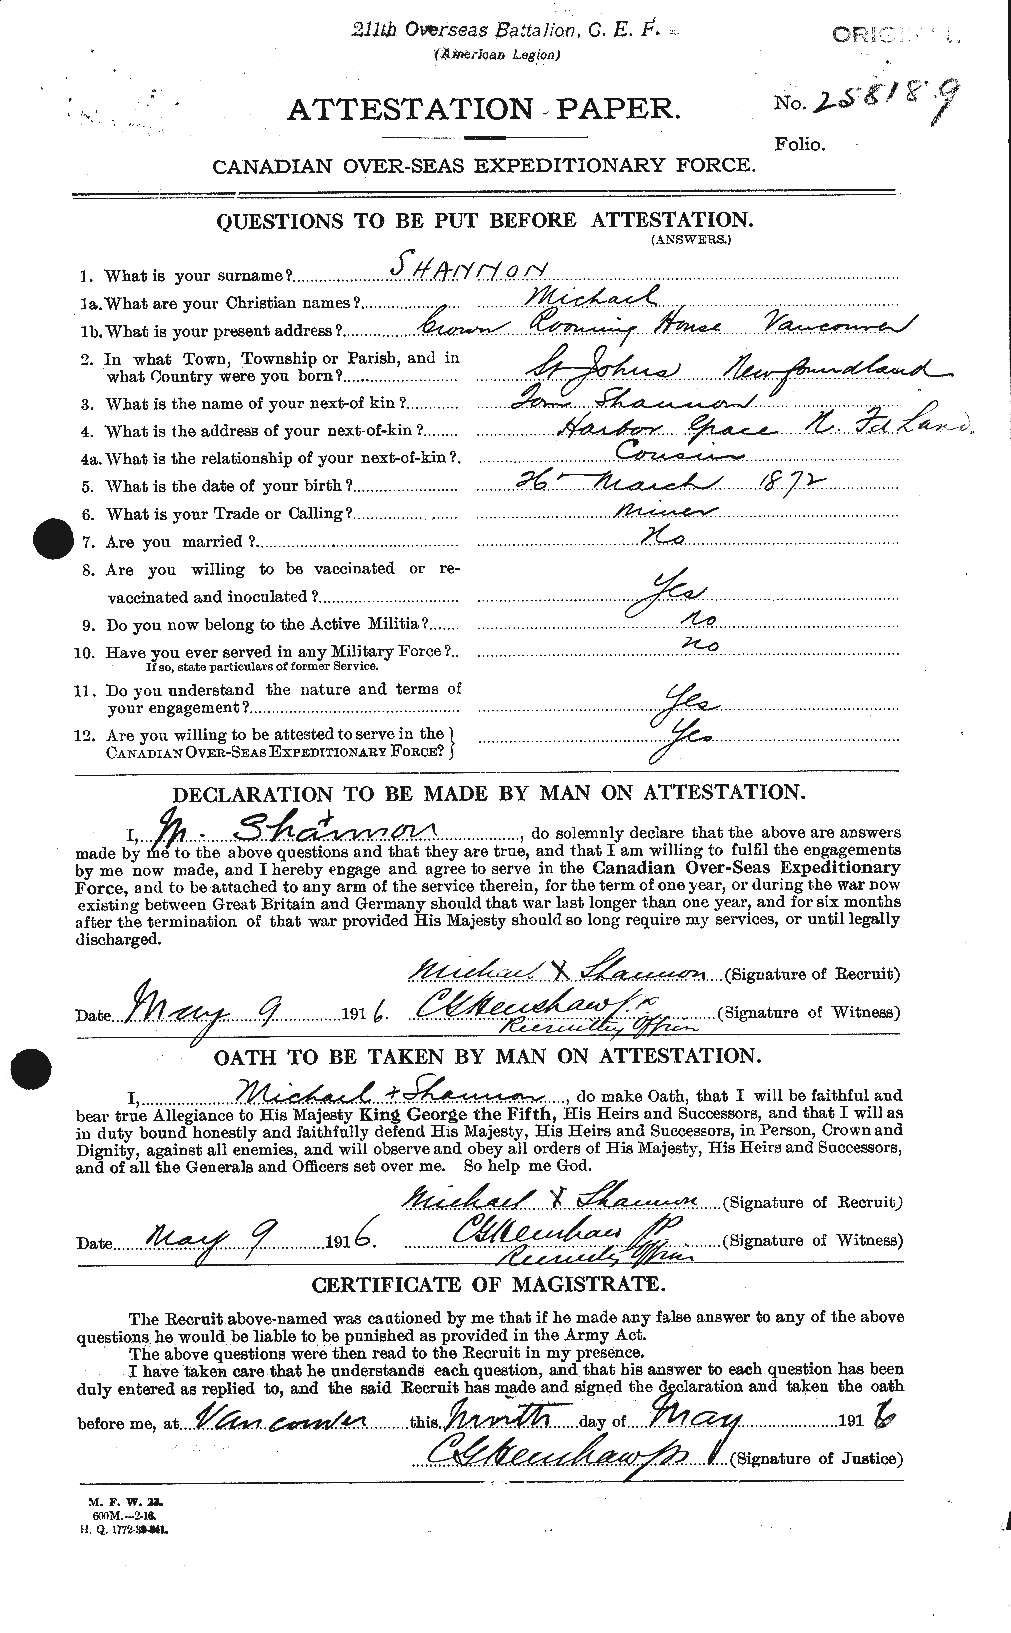 Personnel Records of the First World War - CEF 088440a